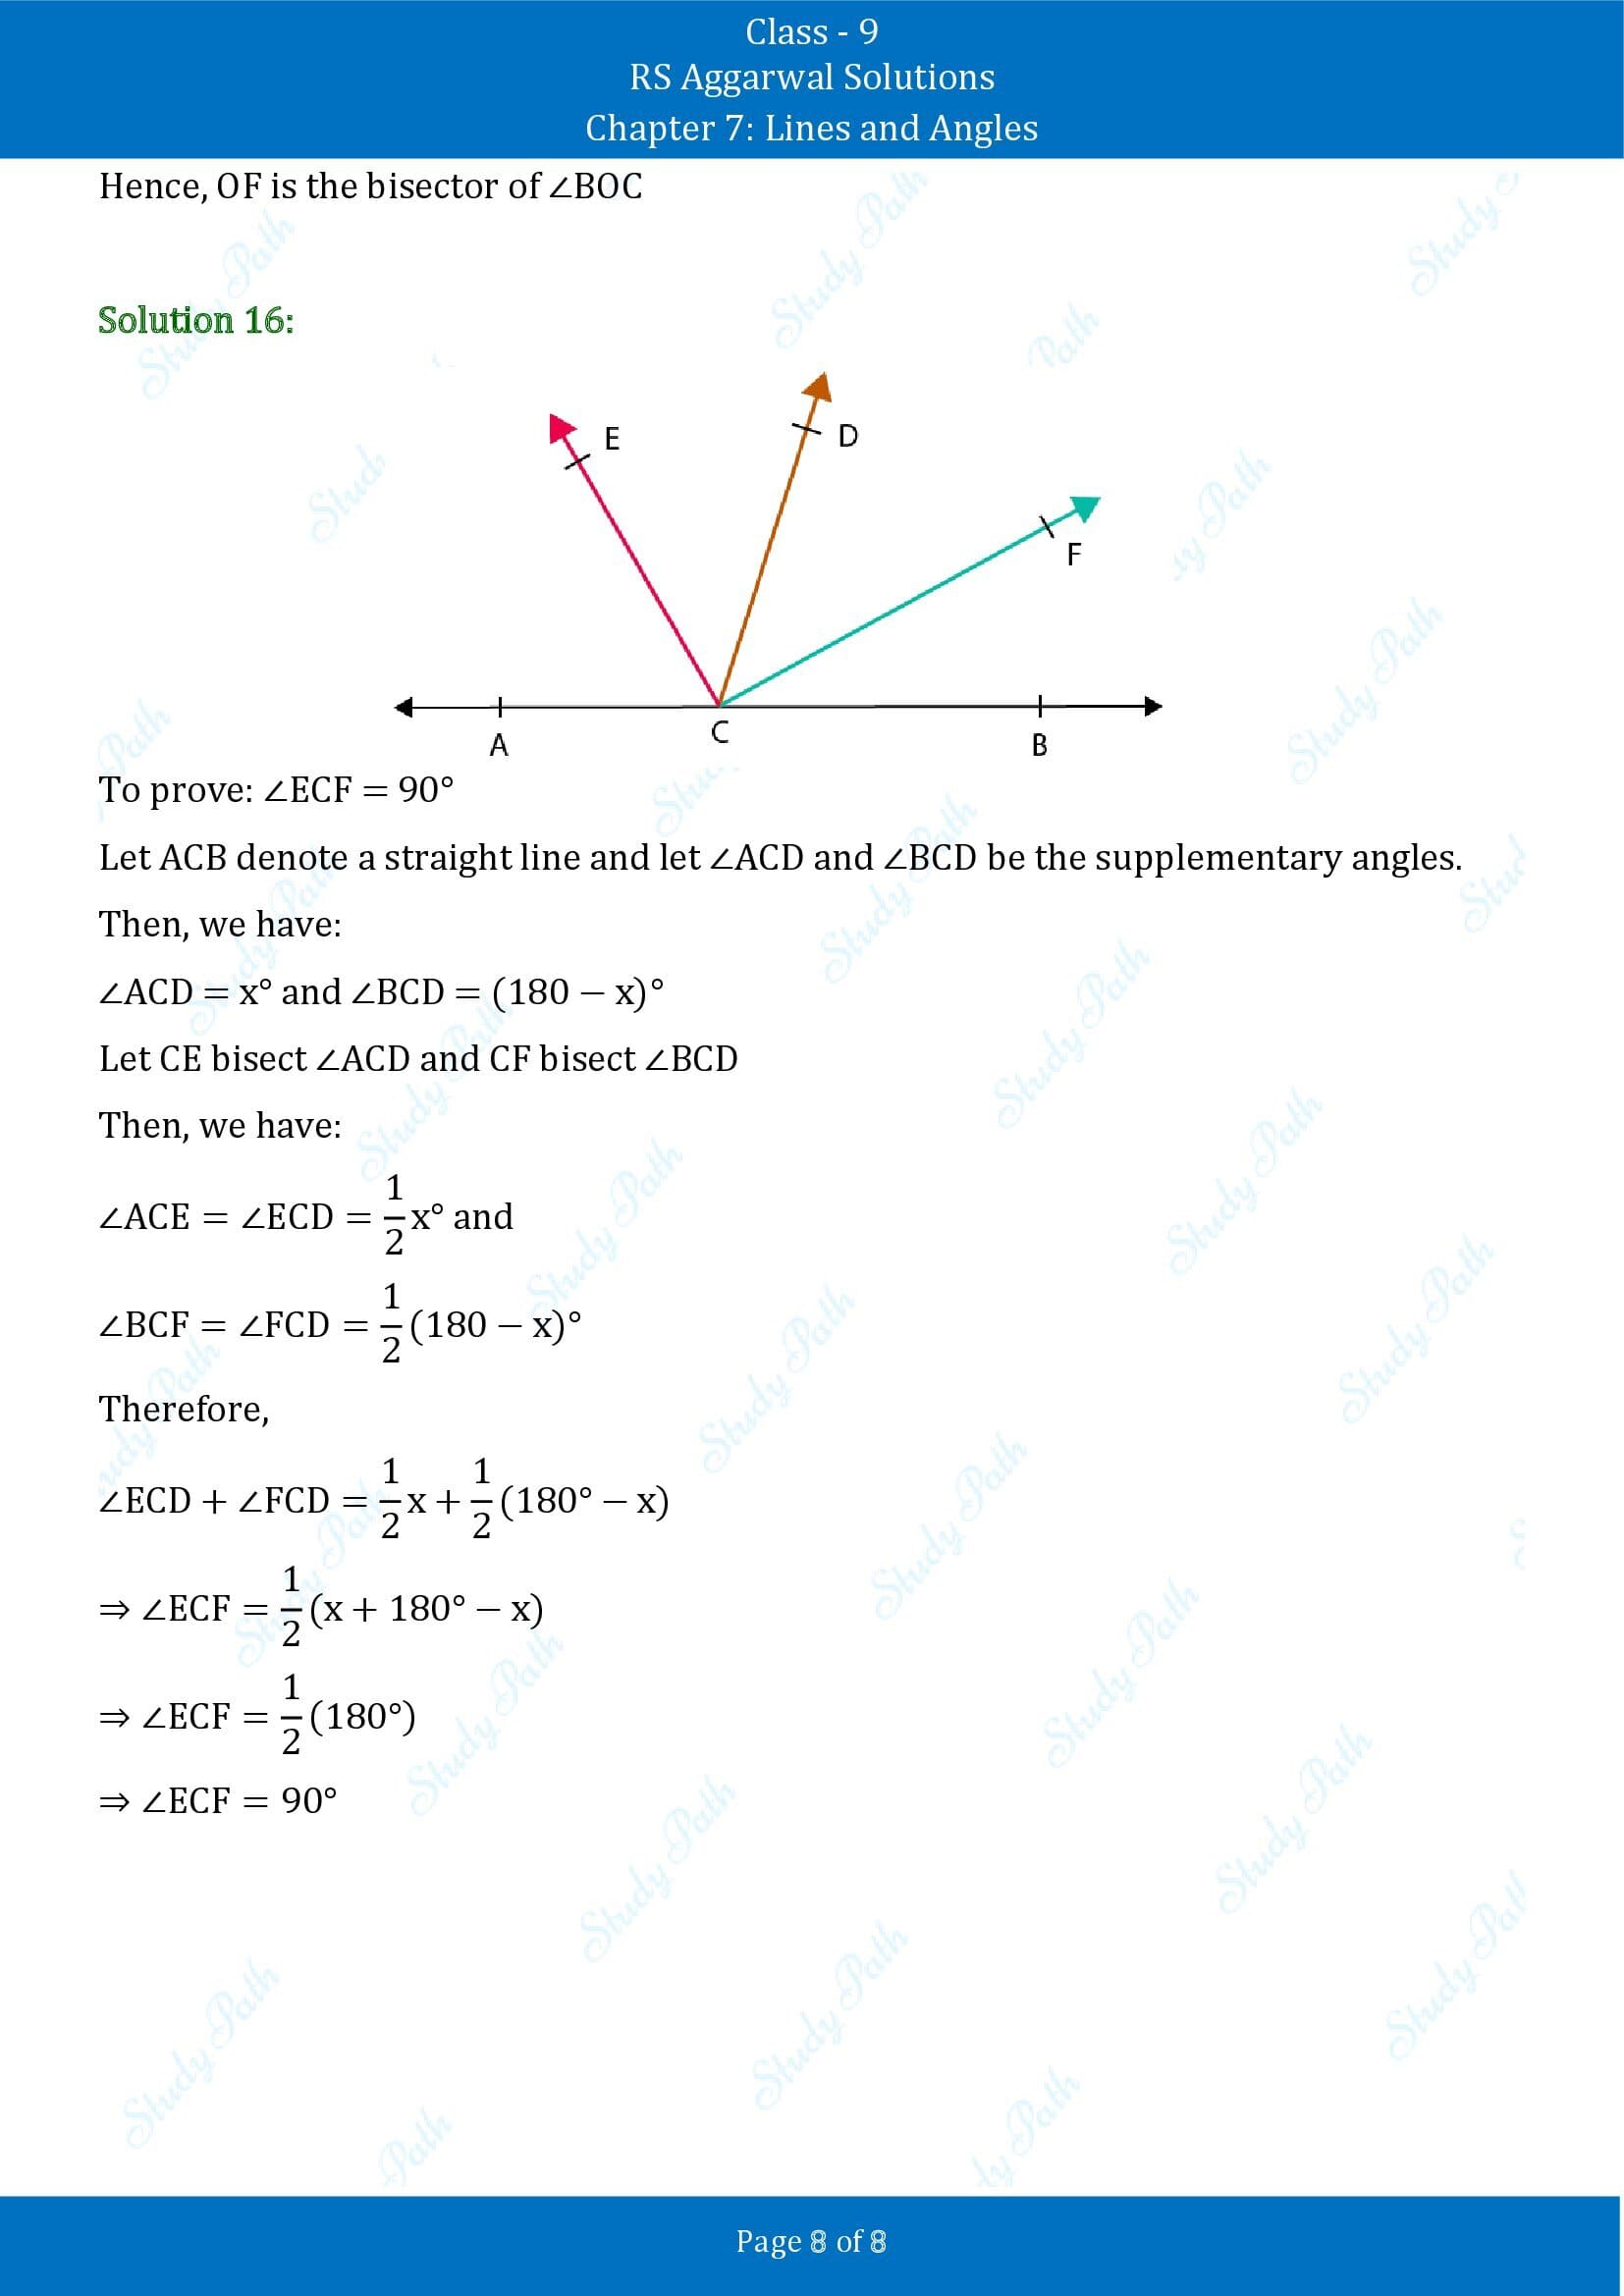 RS Aggarwal Solutions Class 9 Chapter 7 Lines and Angles Exercise 7B 00008